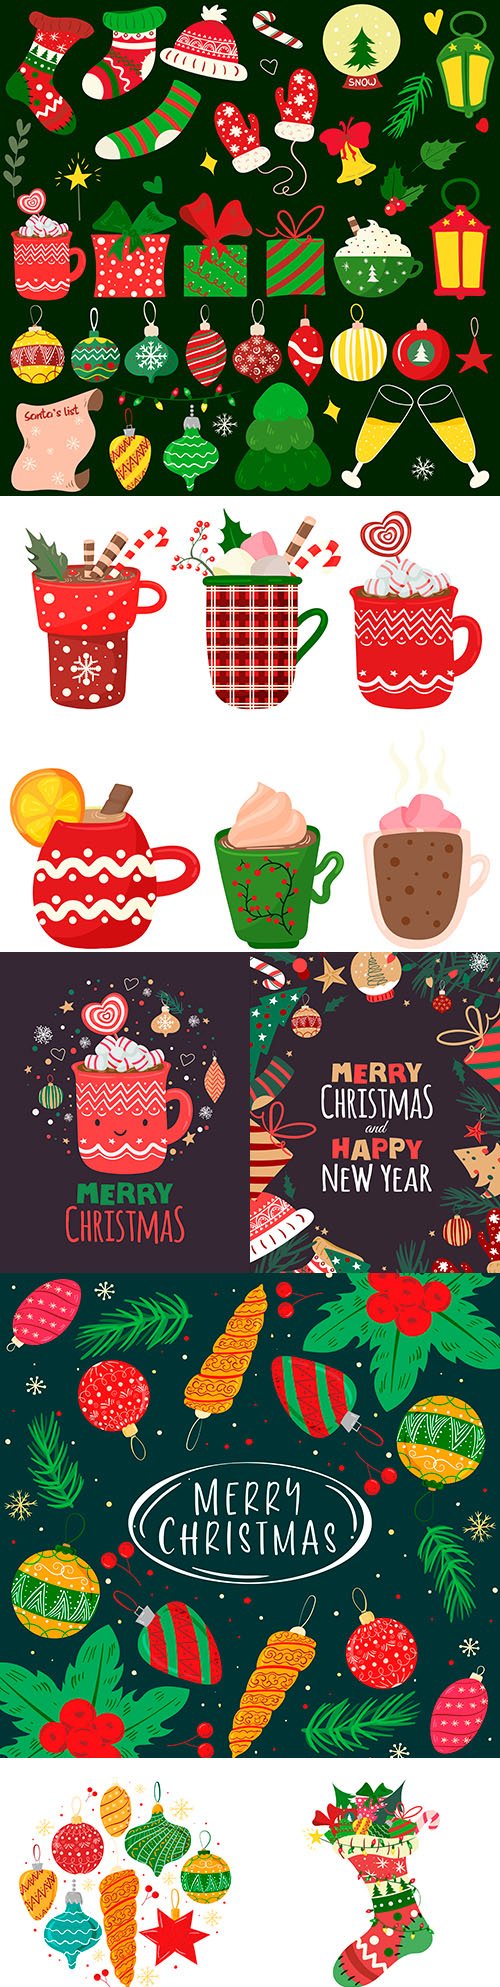 Christmas themed decorations and flat design elements